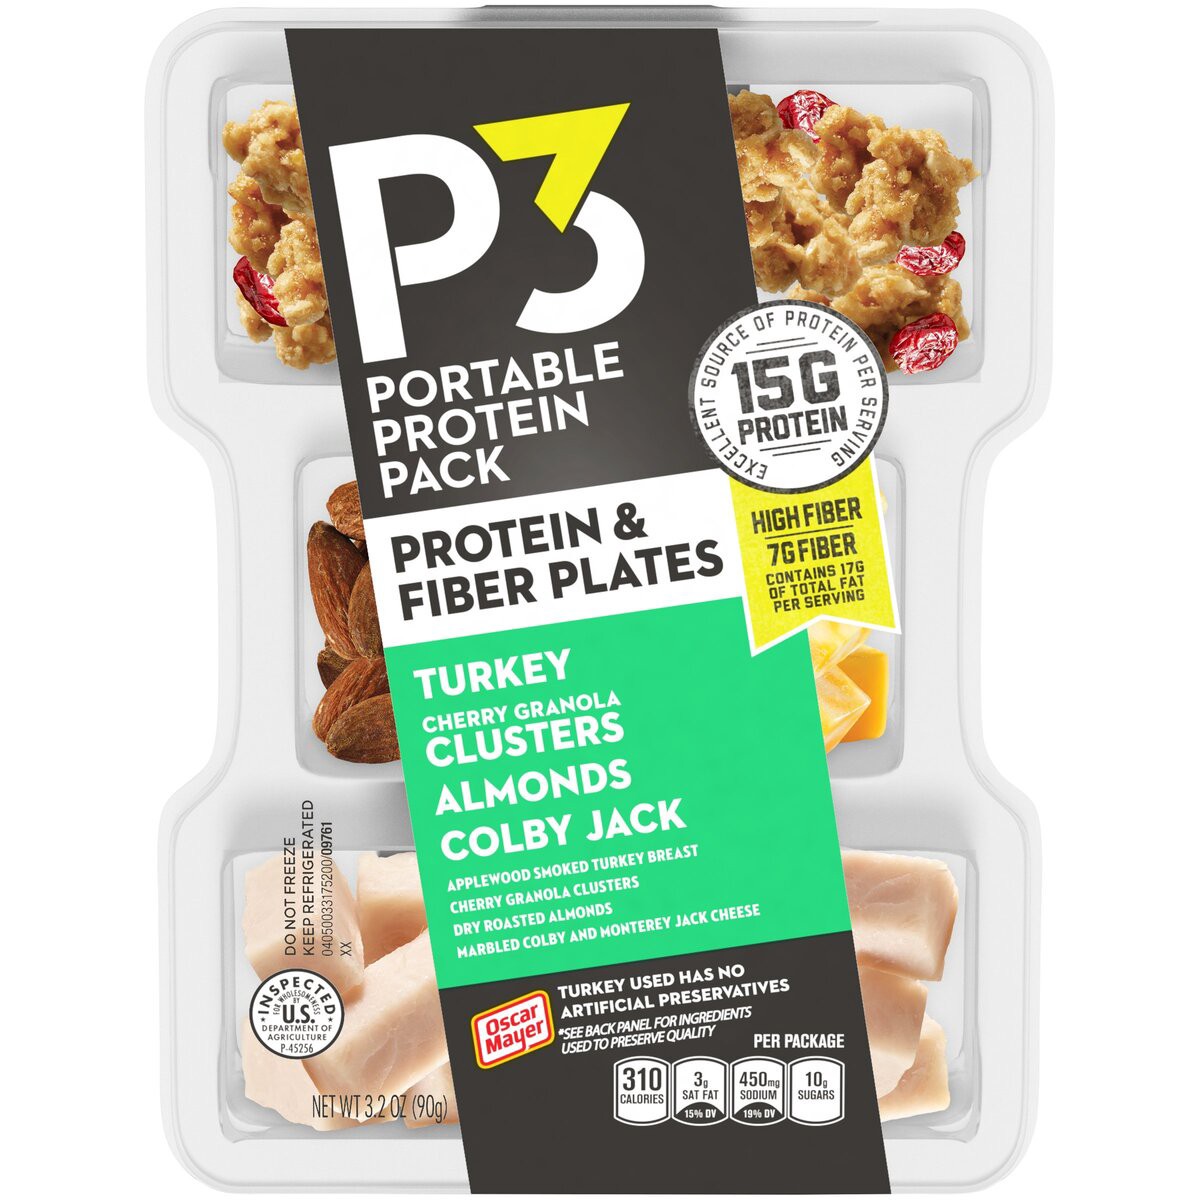 slide 1 of 8, P3 Portable Protein Snack Pack & Fiber Plate with Turkey, Cherry Granola Clusters, Almonds & Colby Jack Cheese Tray, 3.2 oz